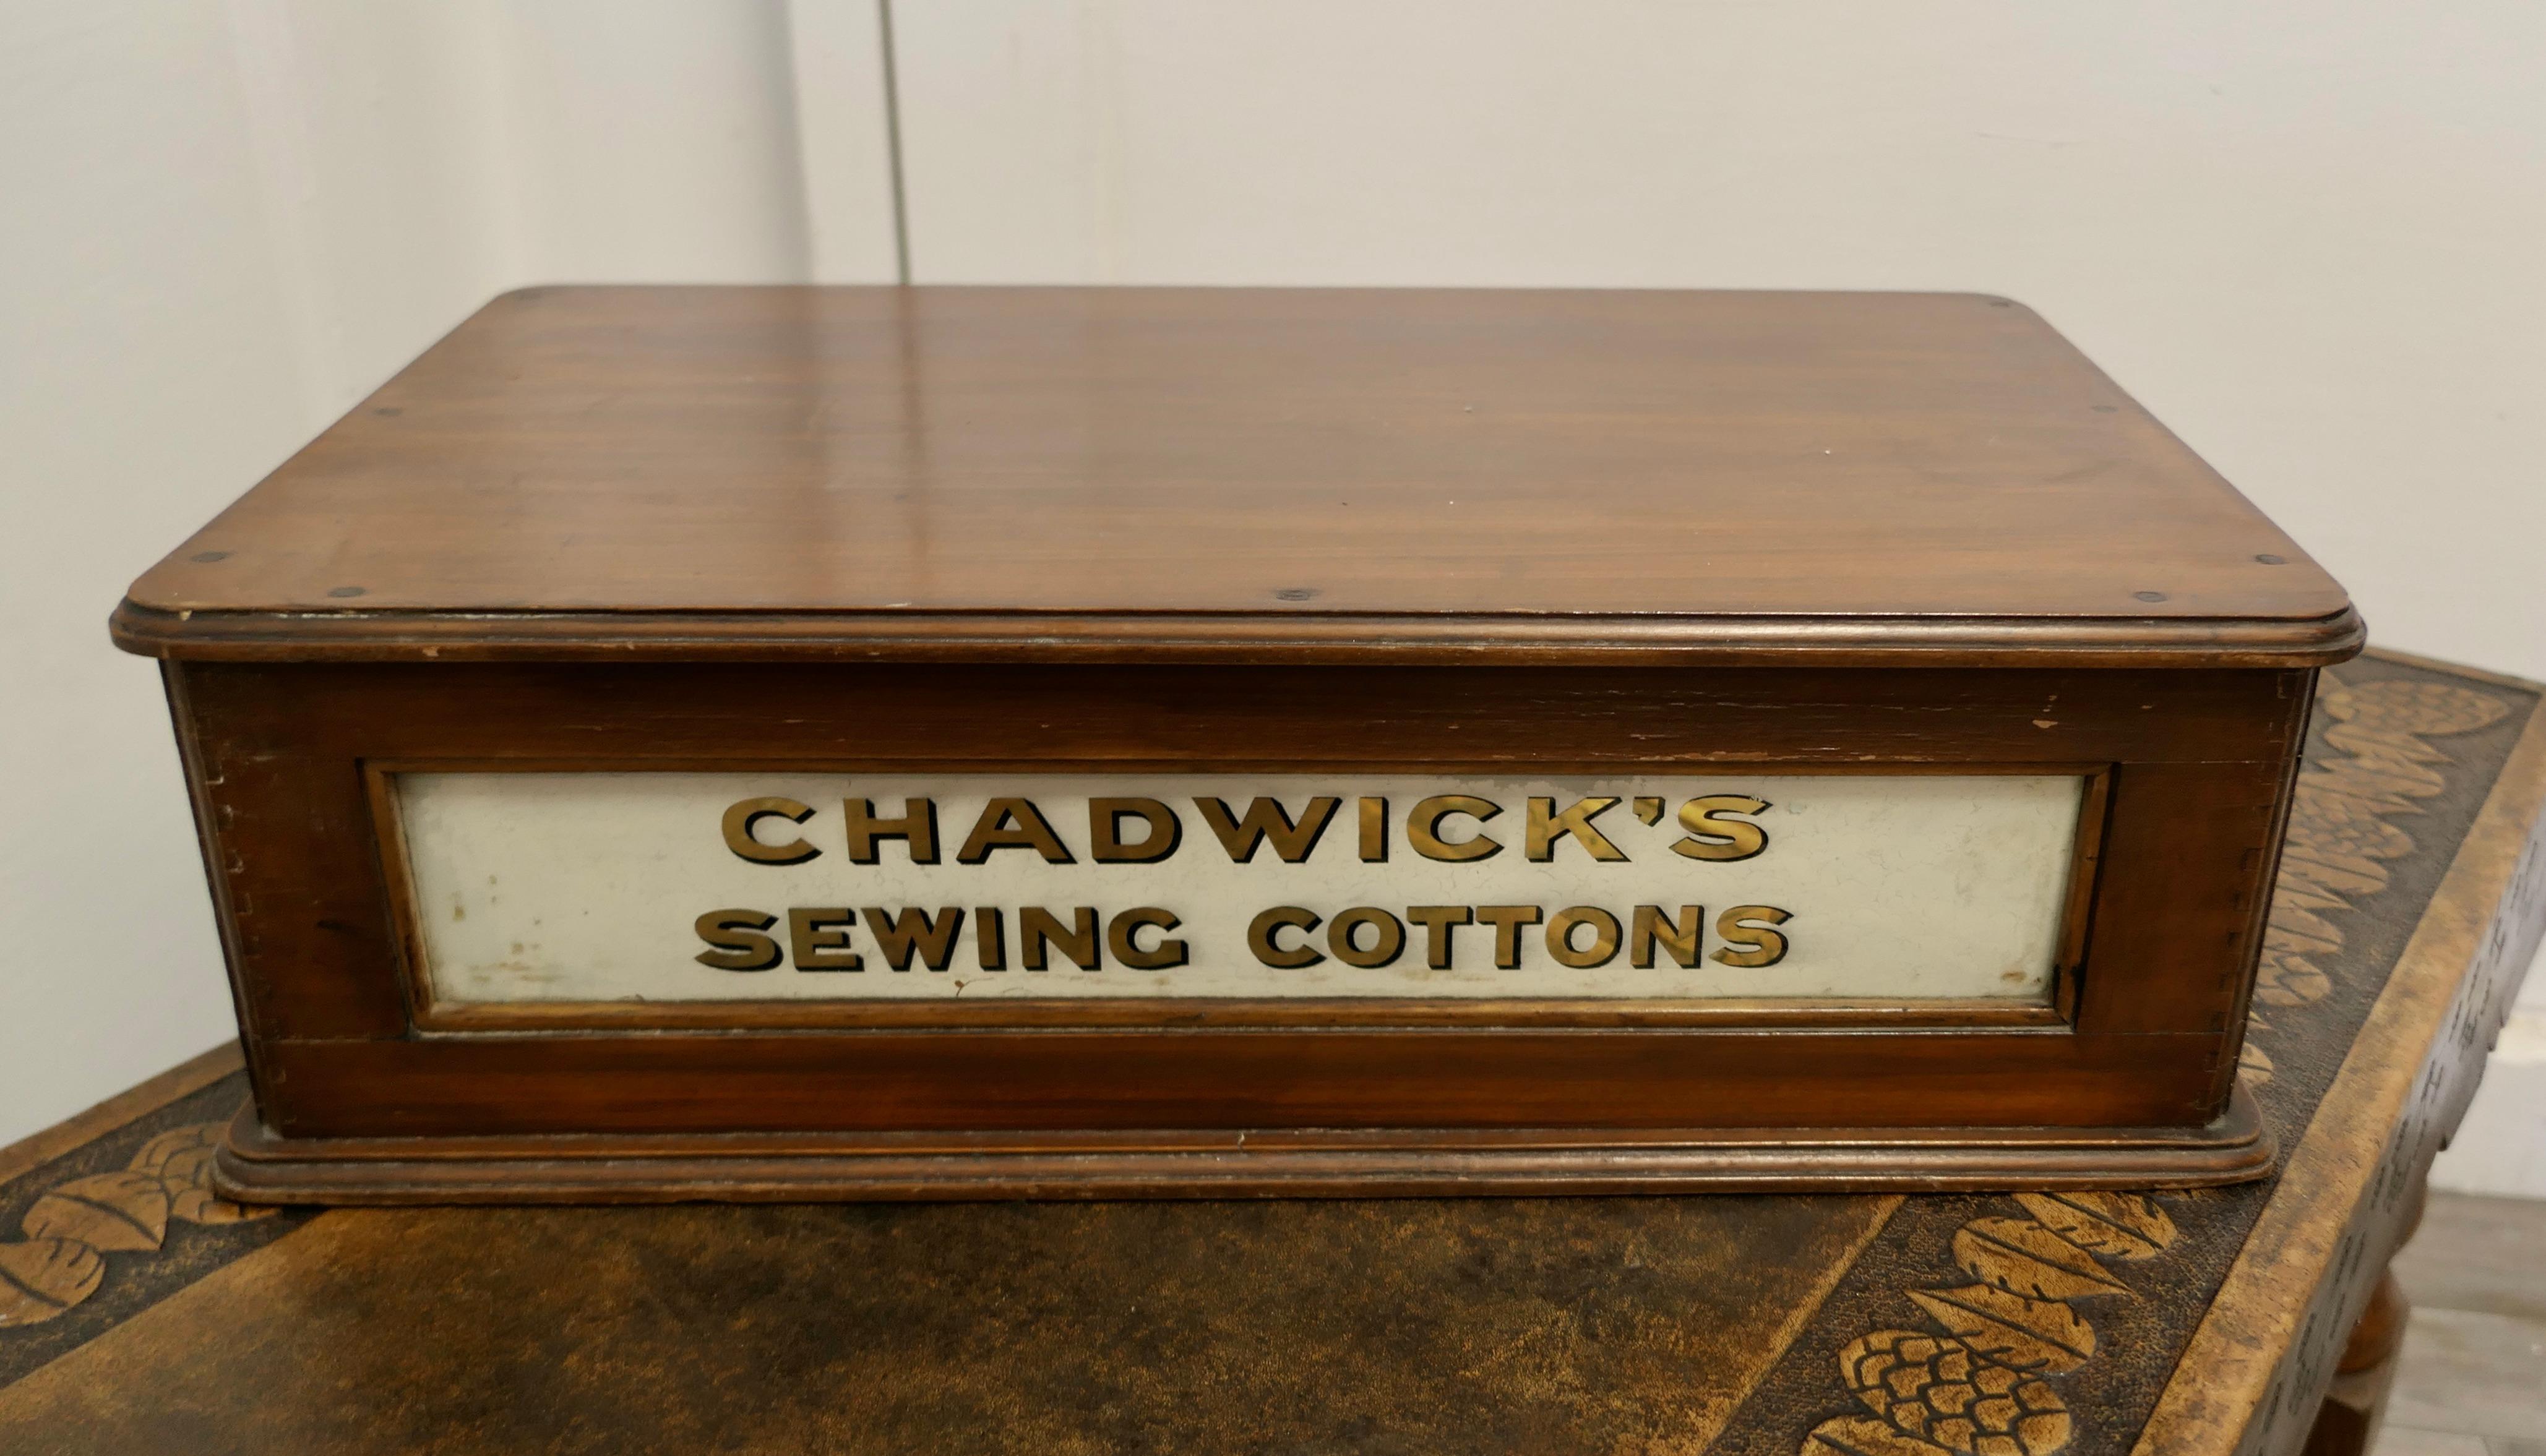 Early 20th Century Chadwick’s Sewing Cottons Counter Top Cotton Reel Display Case   This Charming l For Sale